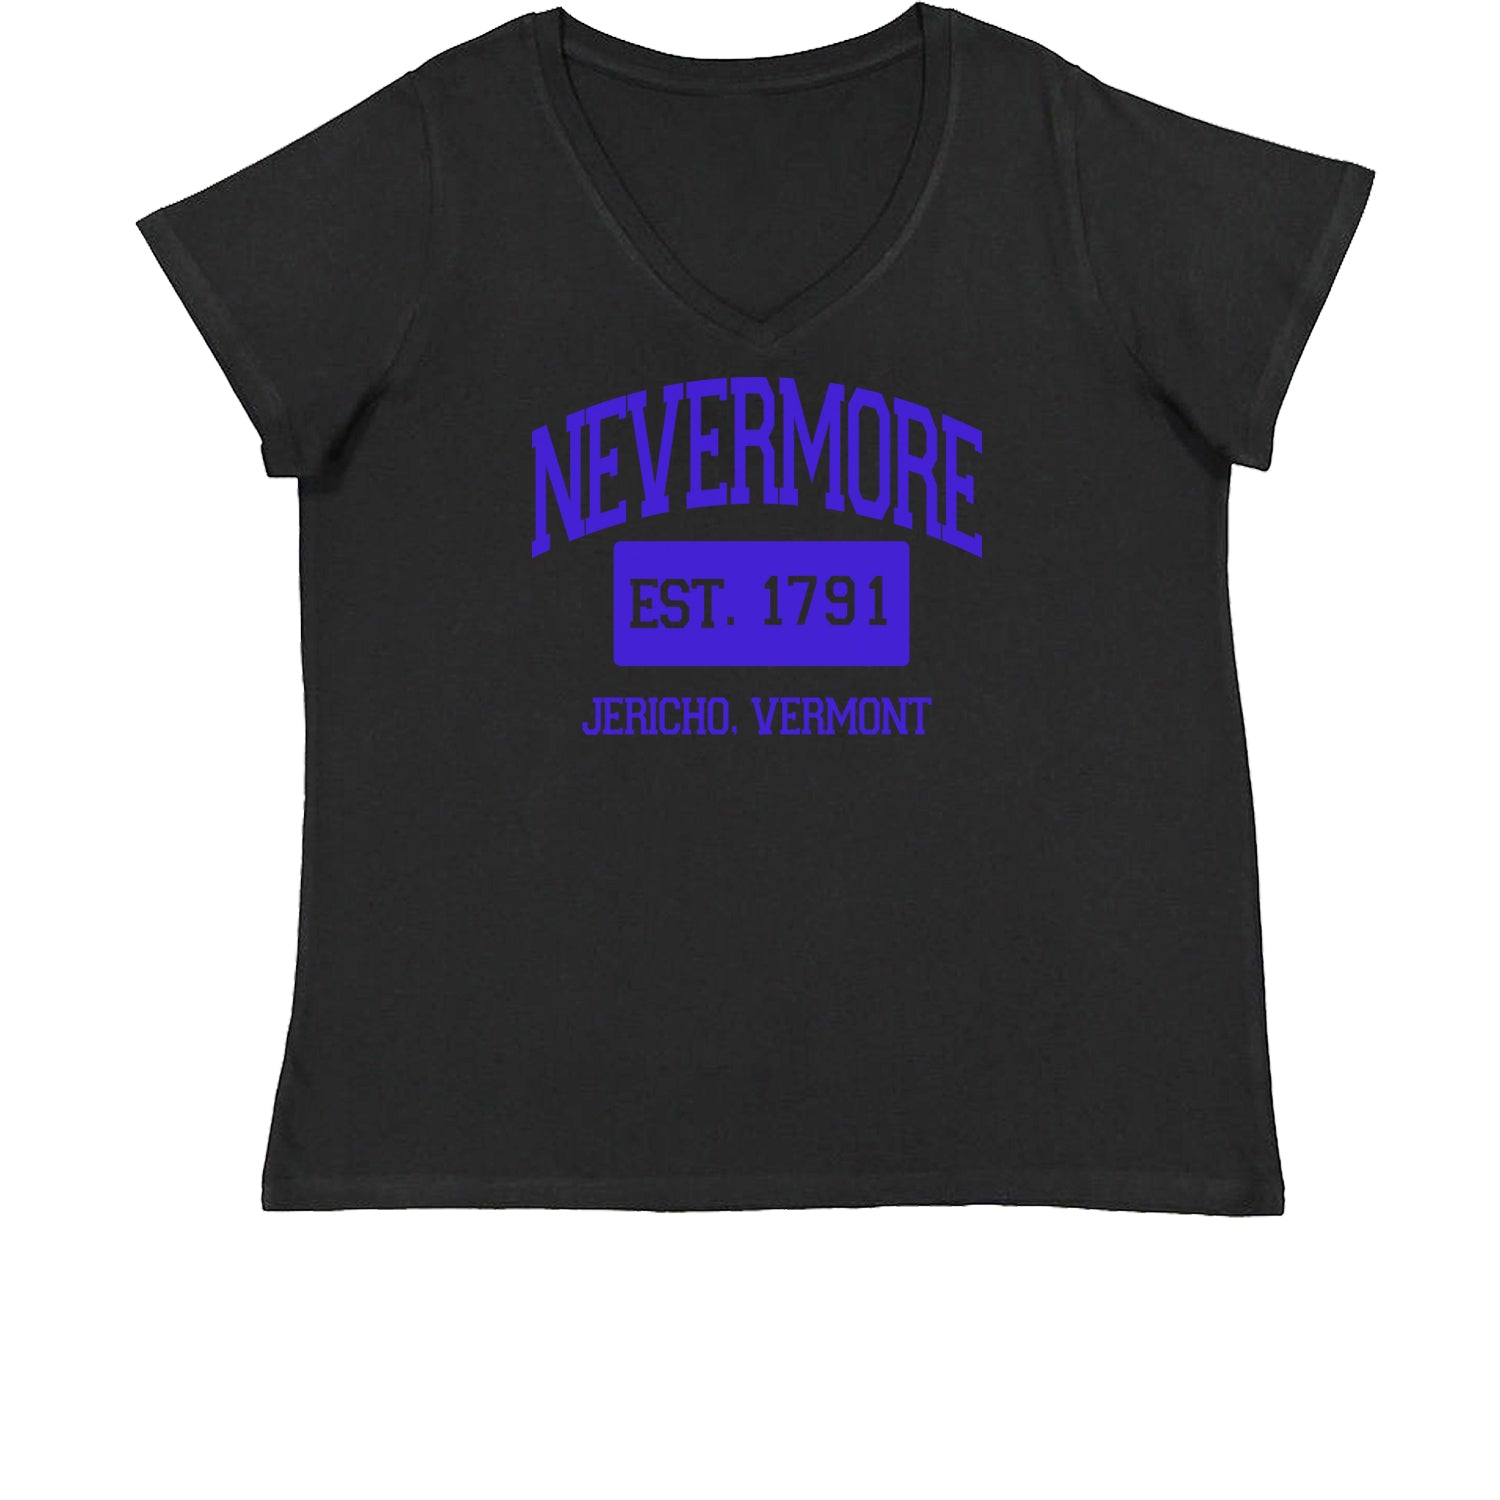 Nevermore Academy Wednesday Womens Plus Size V-Neck T-shirt addams, family, gomez, morticia, pugsly, ricci, Wednesday by Expression Tees